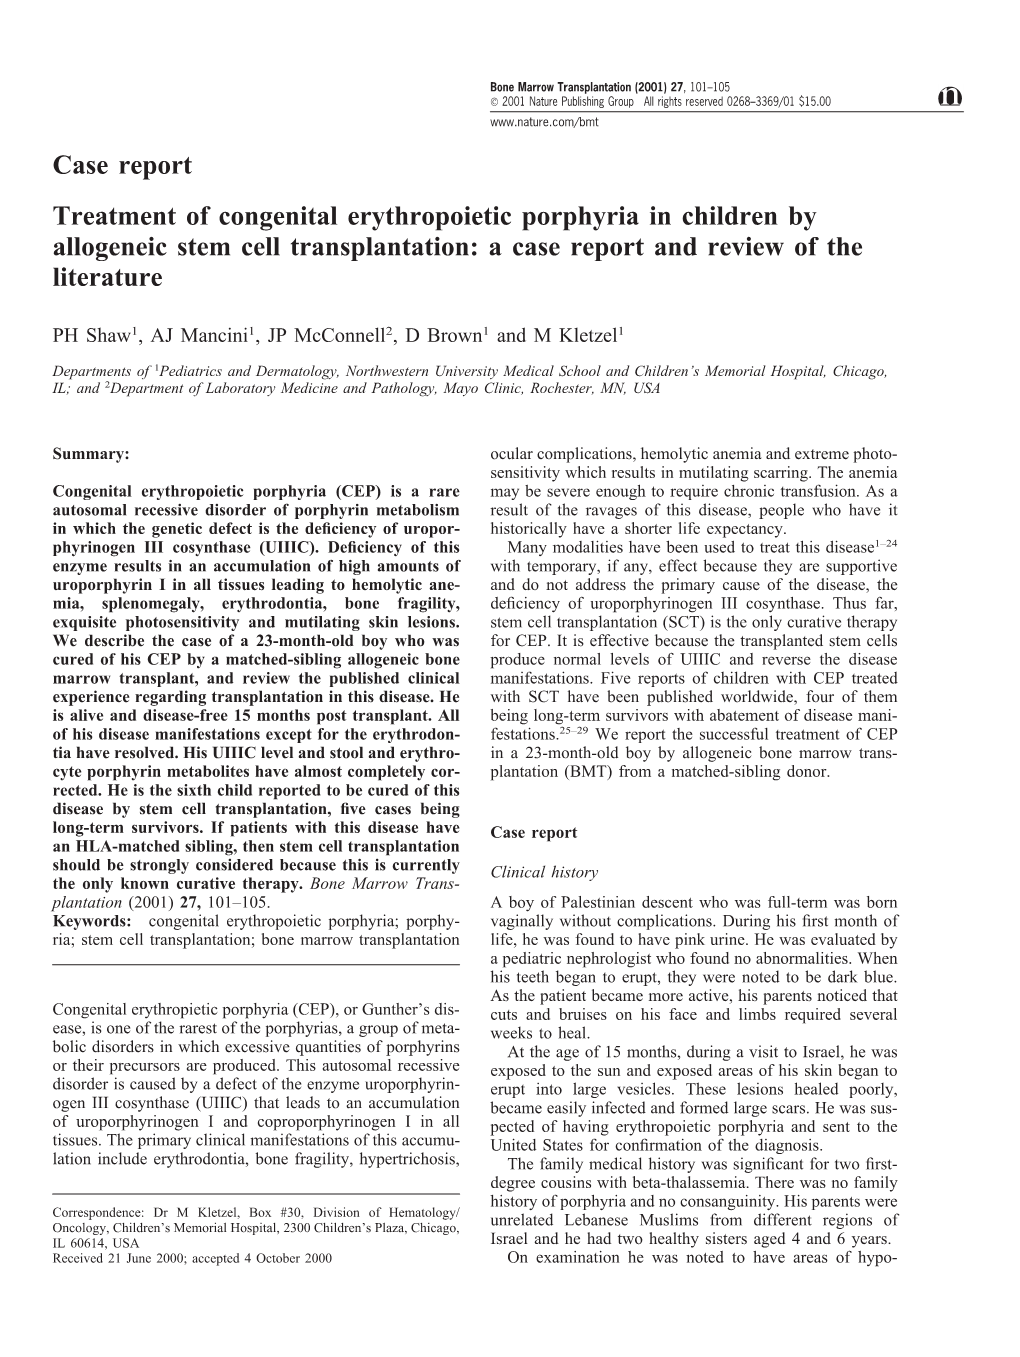 Case Report Treatment of Congenital Erythropoietic Porphyria in Children by Allogeneic Stem Cell Transplantation: a Case Report and Review of the Literature